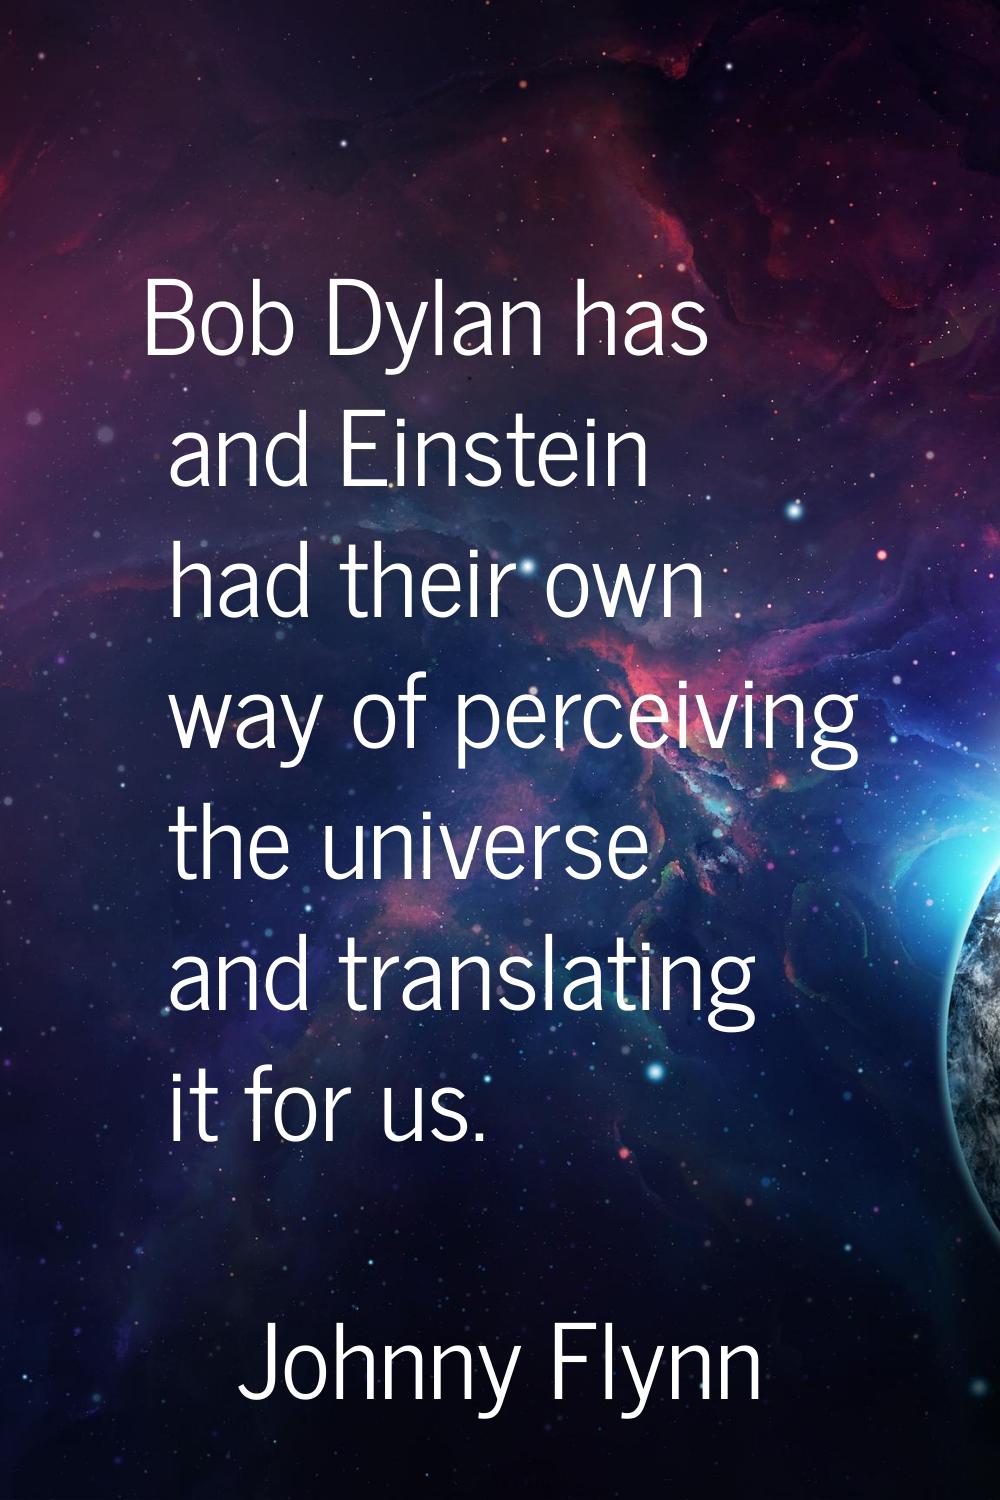 Bob Dylan has and Einstein had their own way of perceiving the universe and translating it for us.